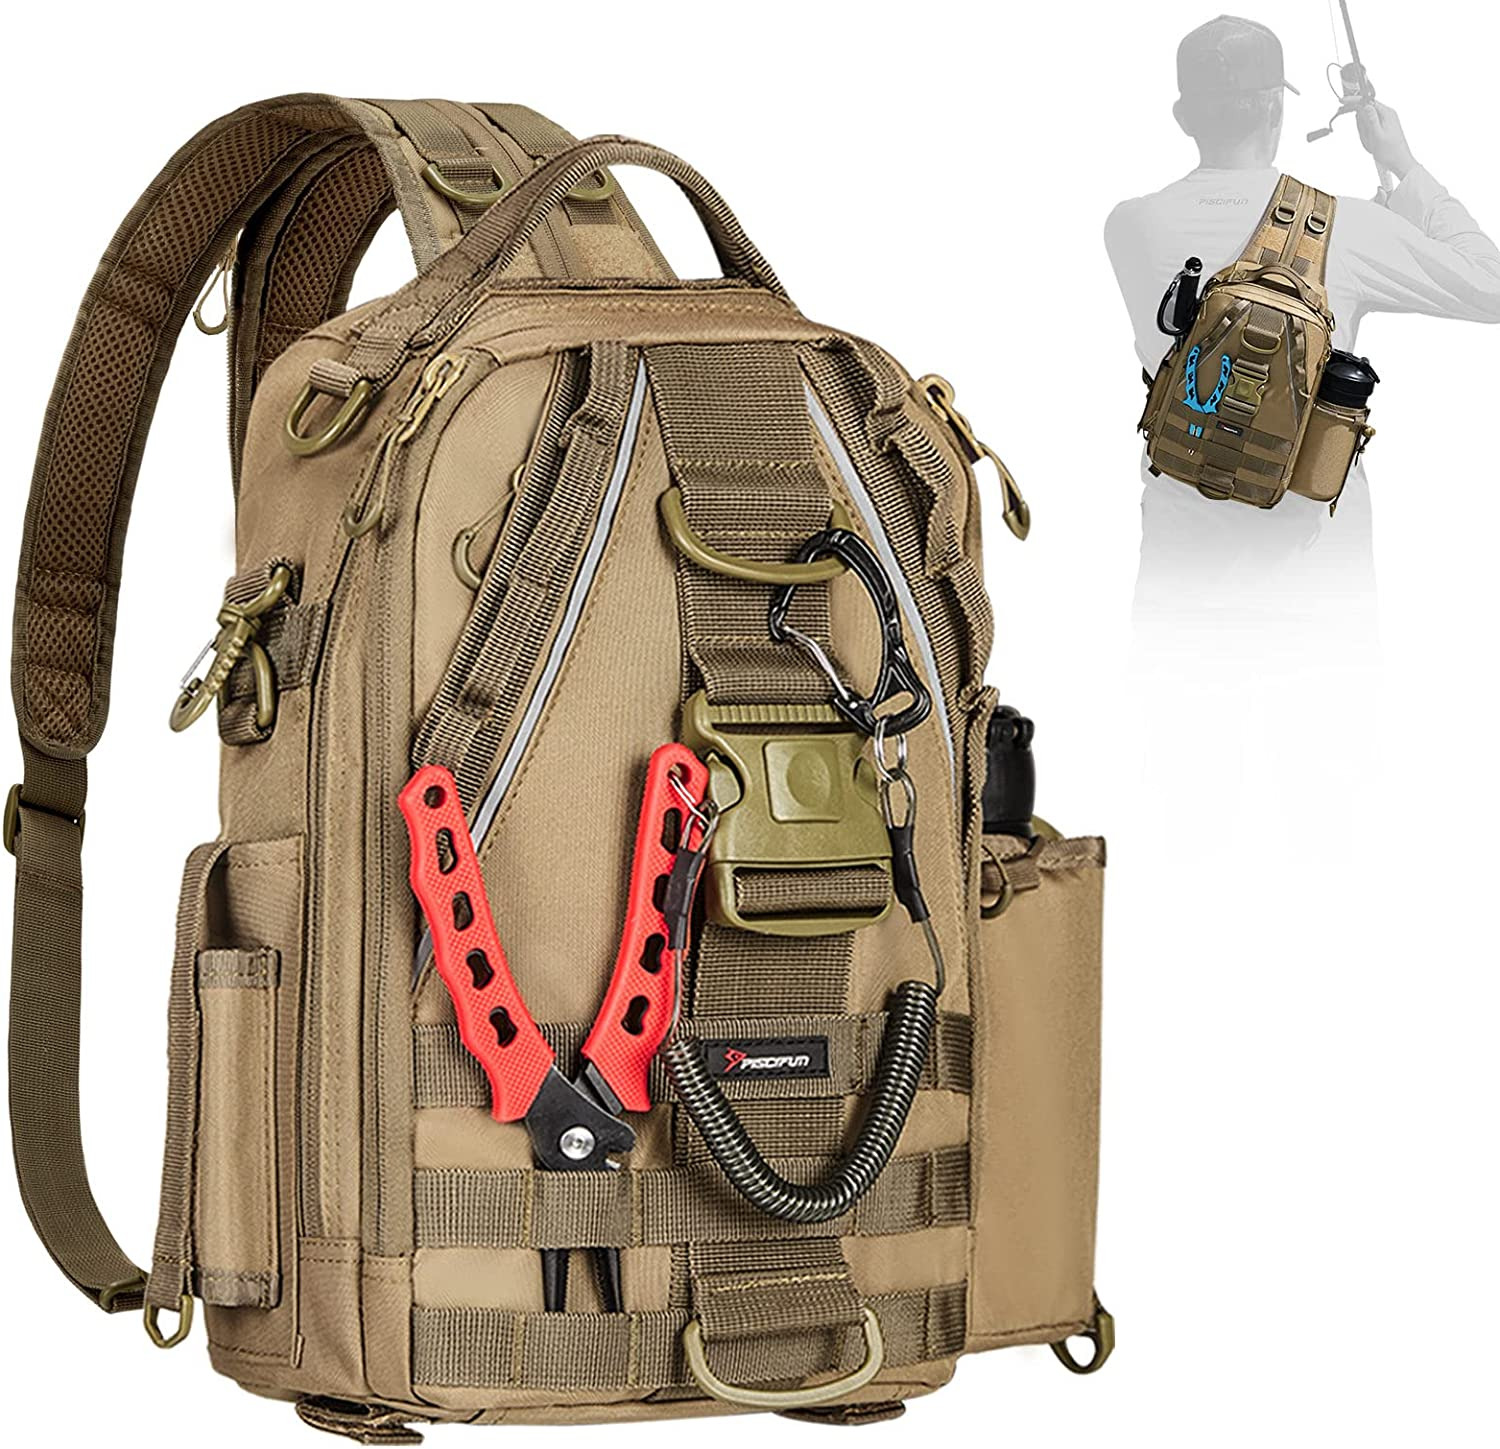 Lightweight Multifunctional Outdoor Fishing Tackle Backpack W/ Rod & Gear Holder